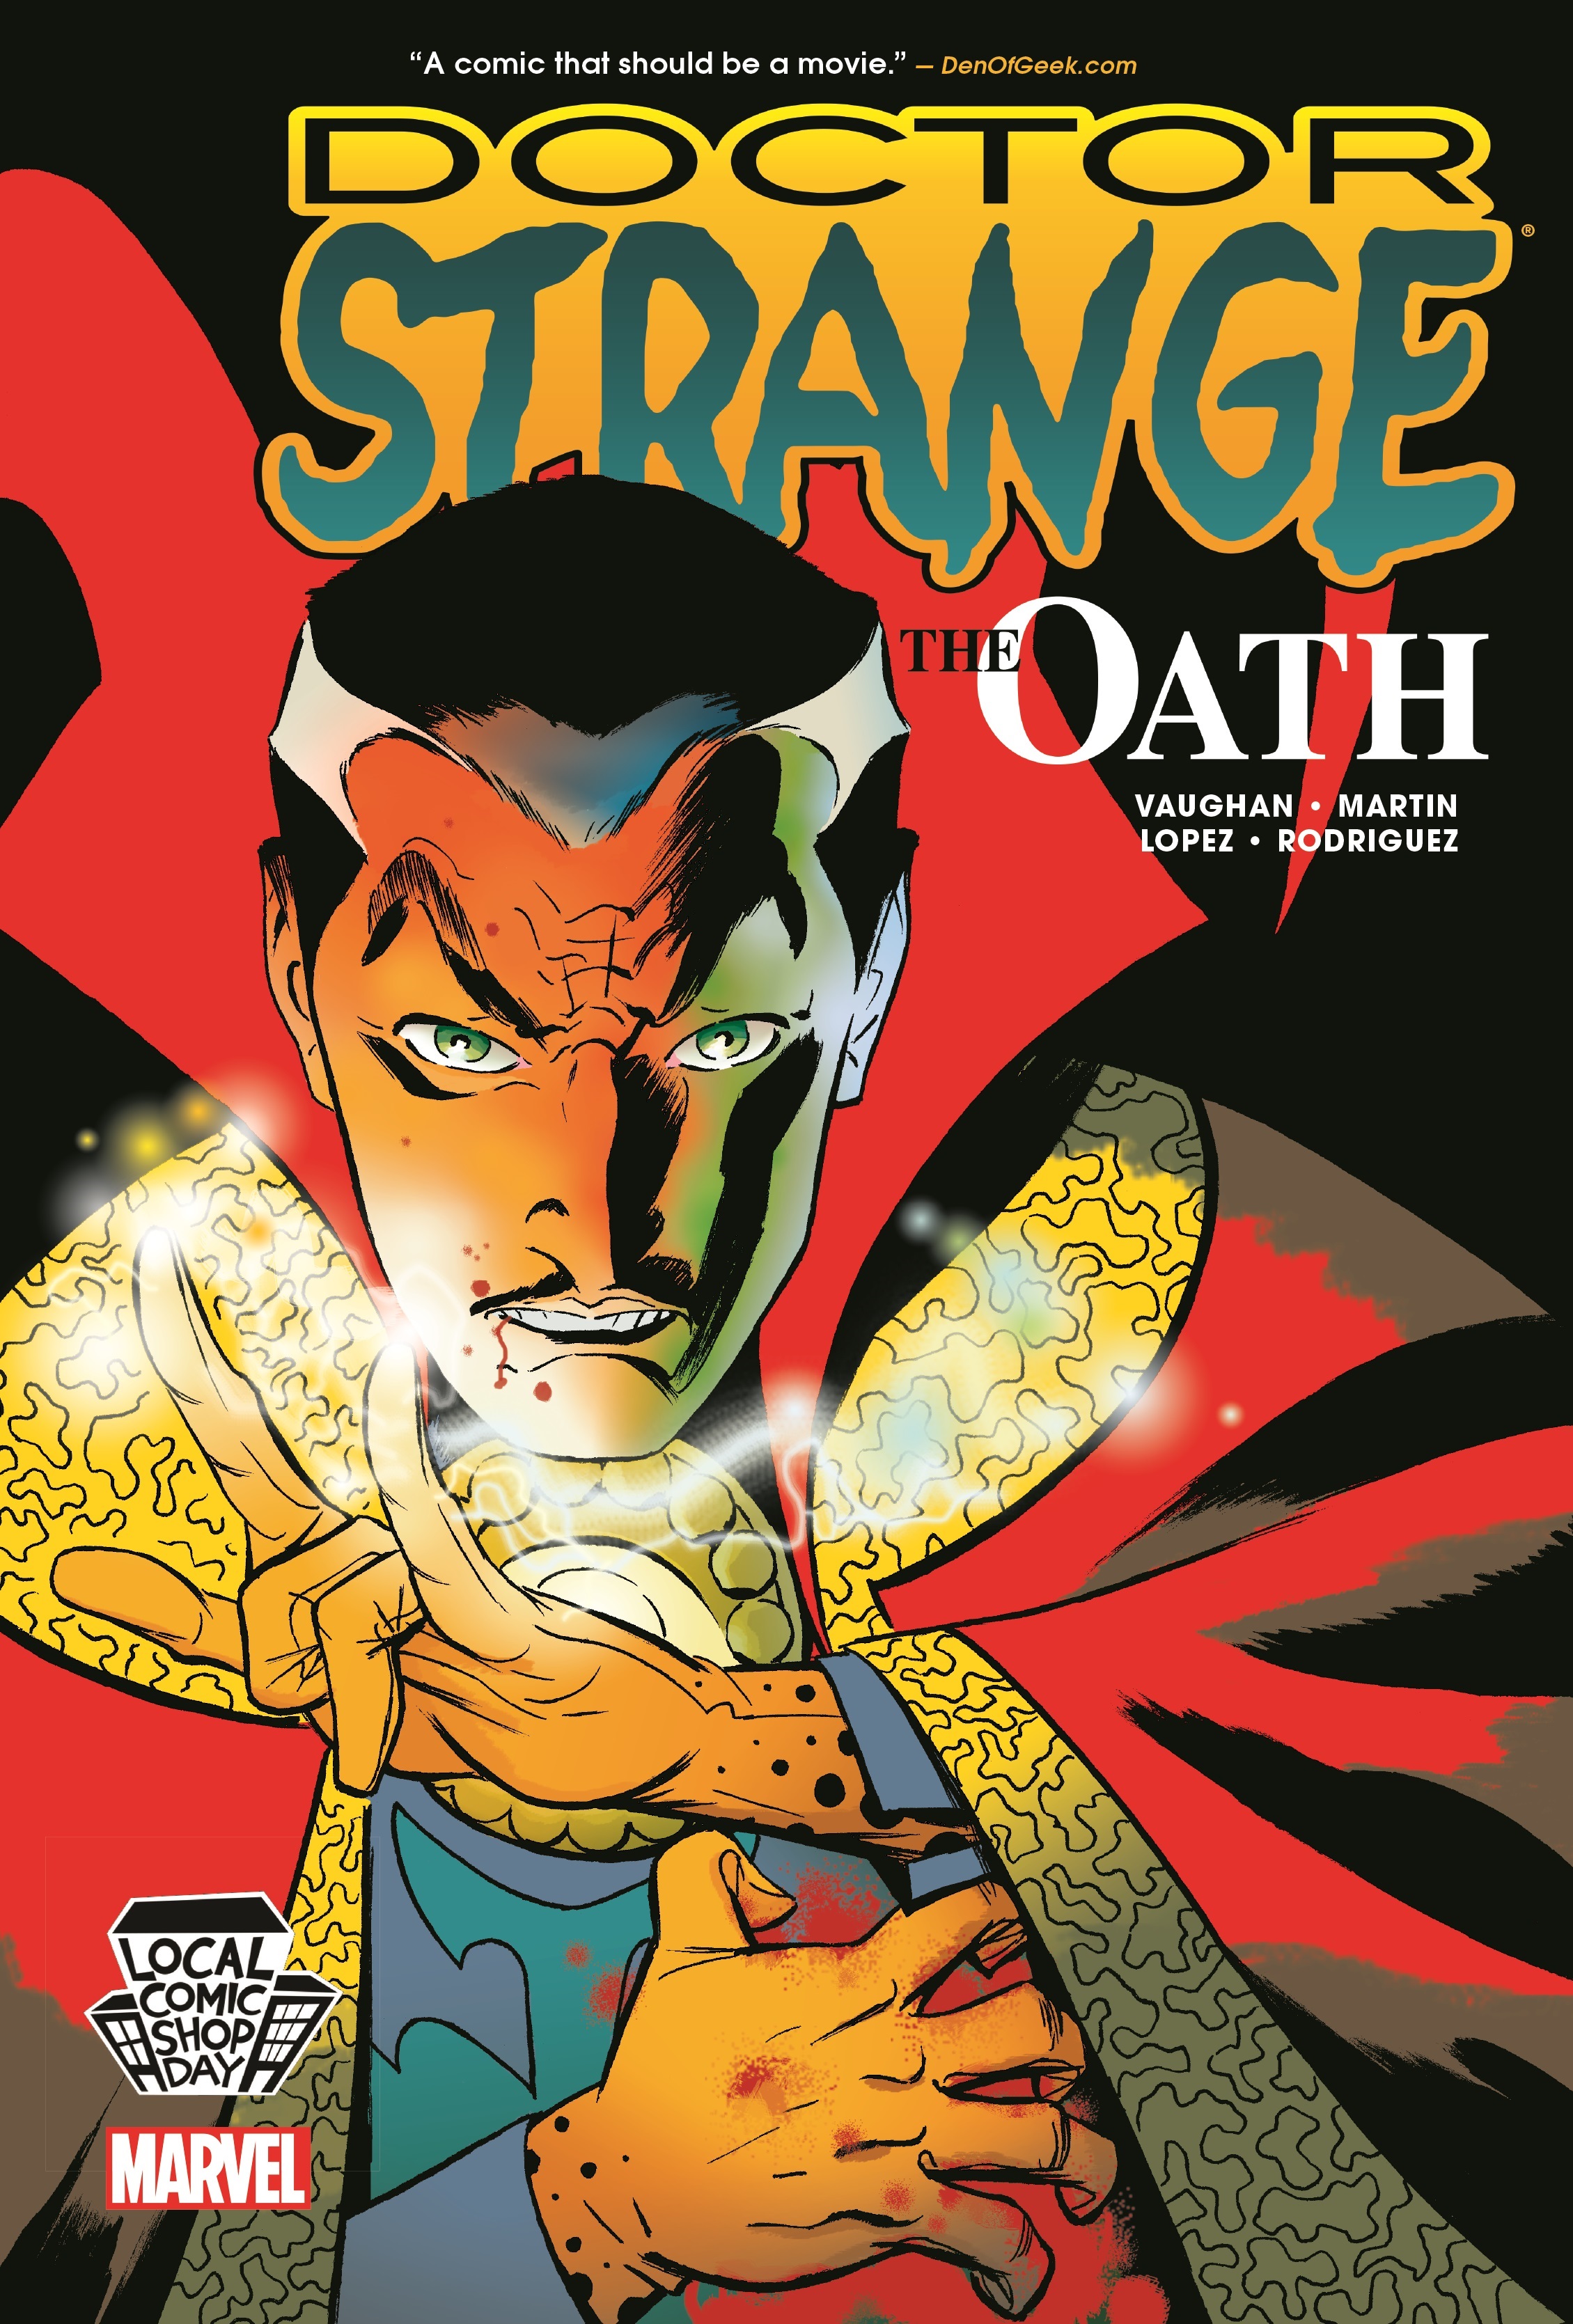 Doctor Strange: The Oath - LCSD Exclusive (Hardcover)